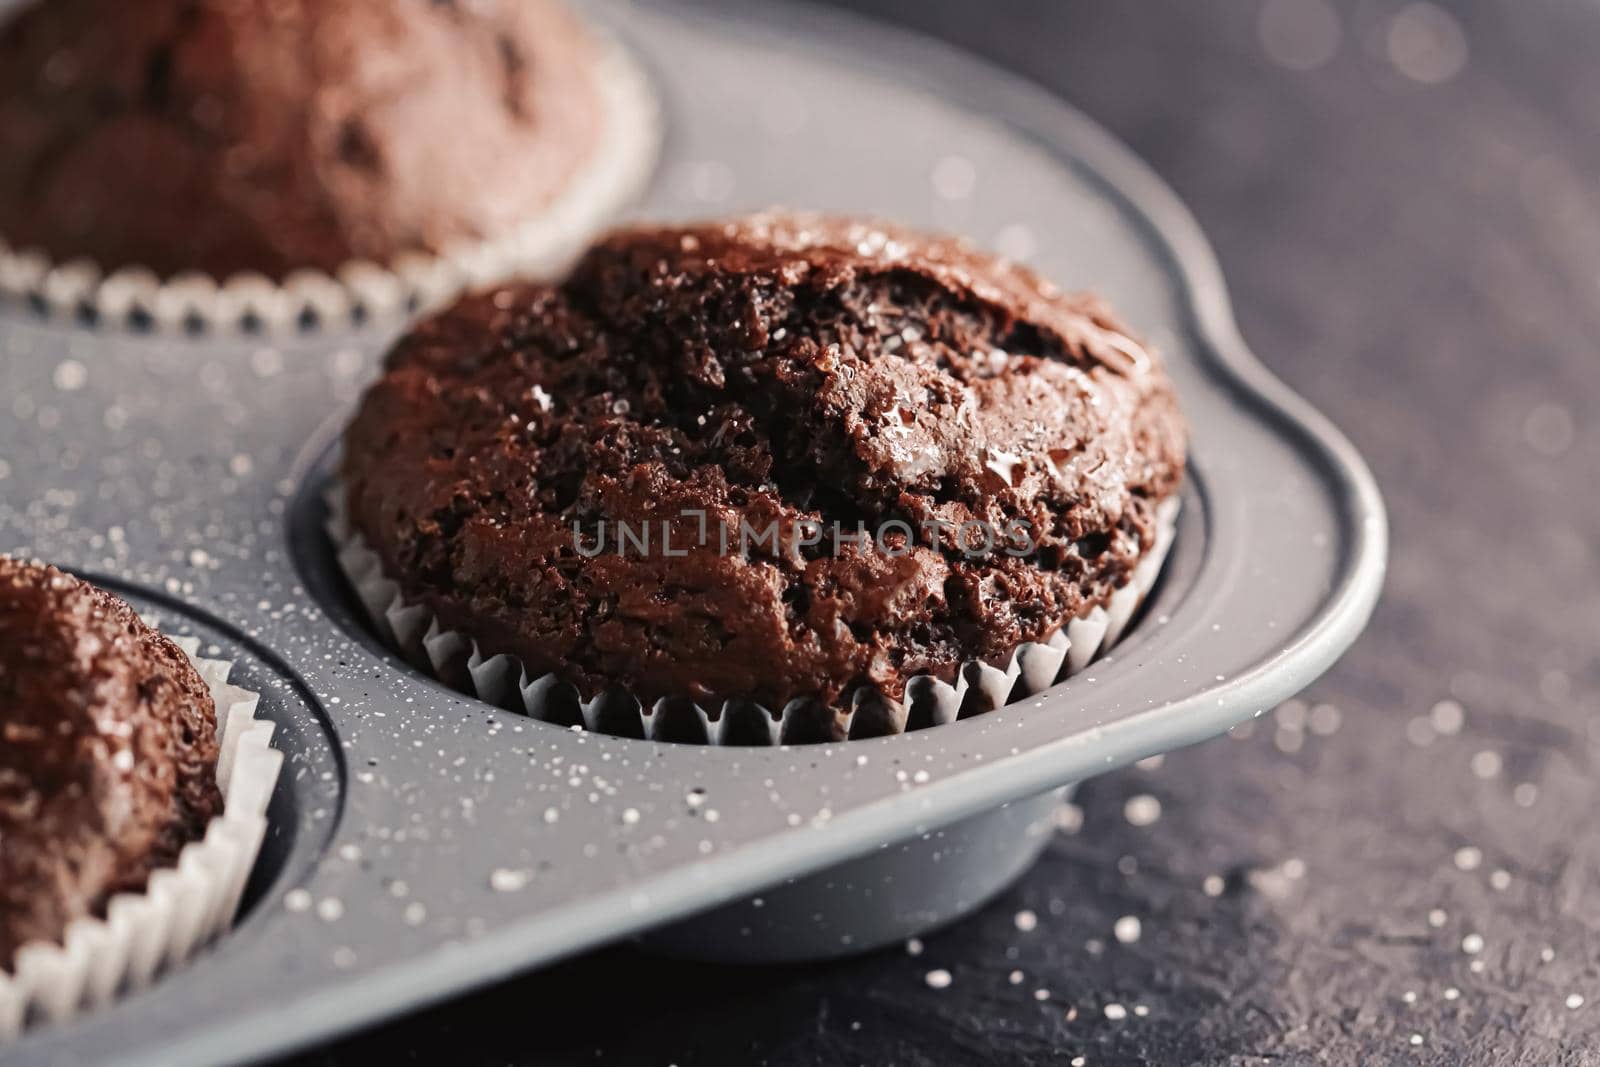 Just baked chocolate muffins in tray, homemade comfort food recipe by Anneleven